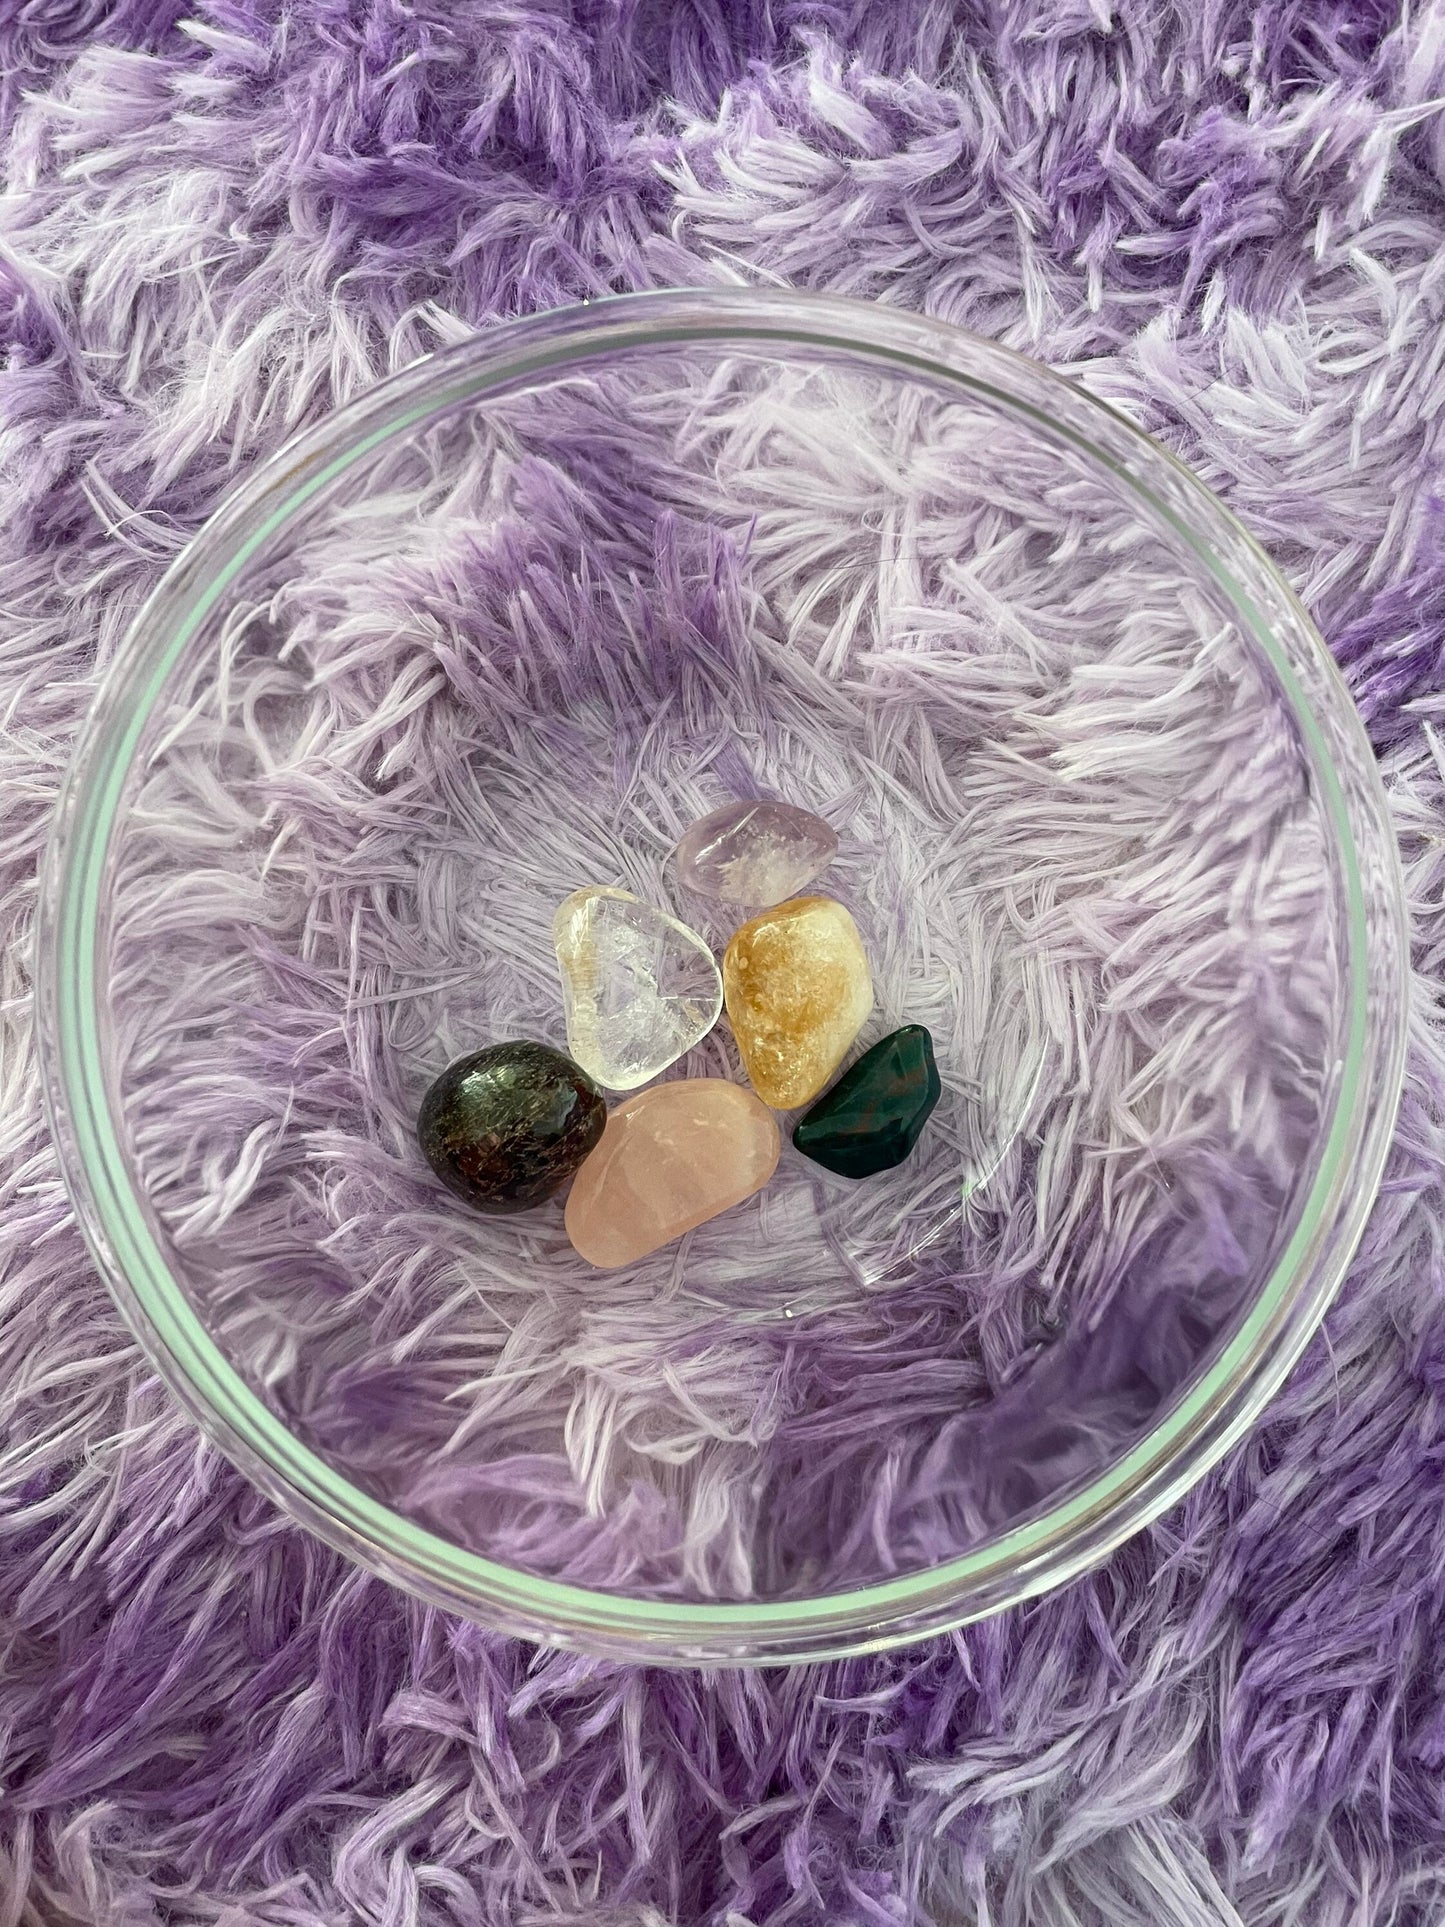 Aries crystal set of 6 crystal stones specifically for the Ram